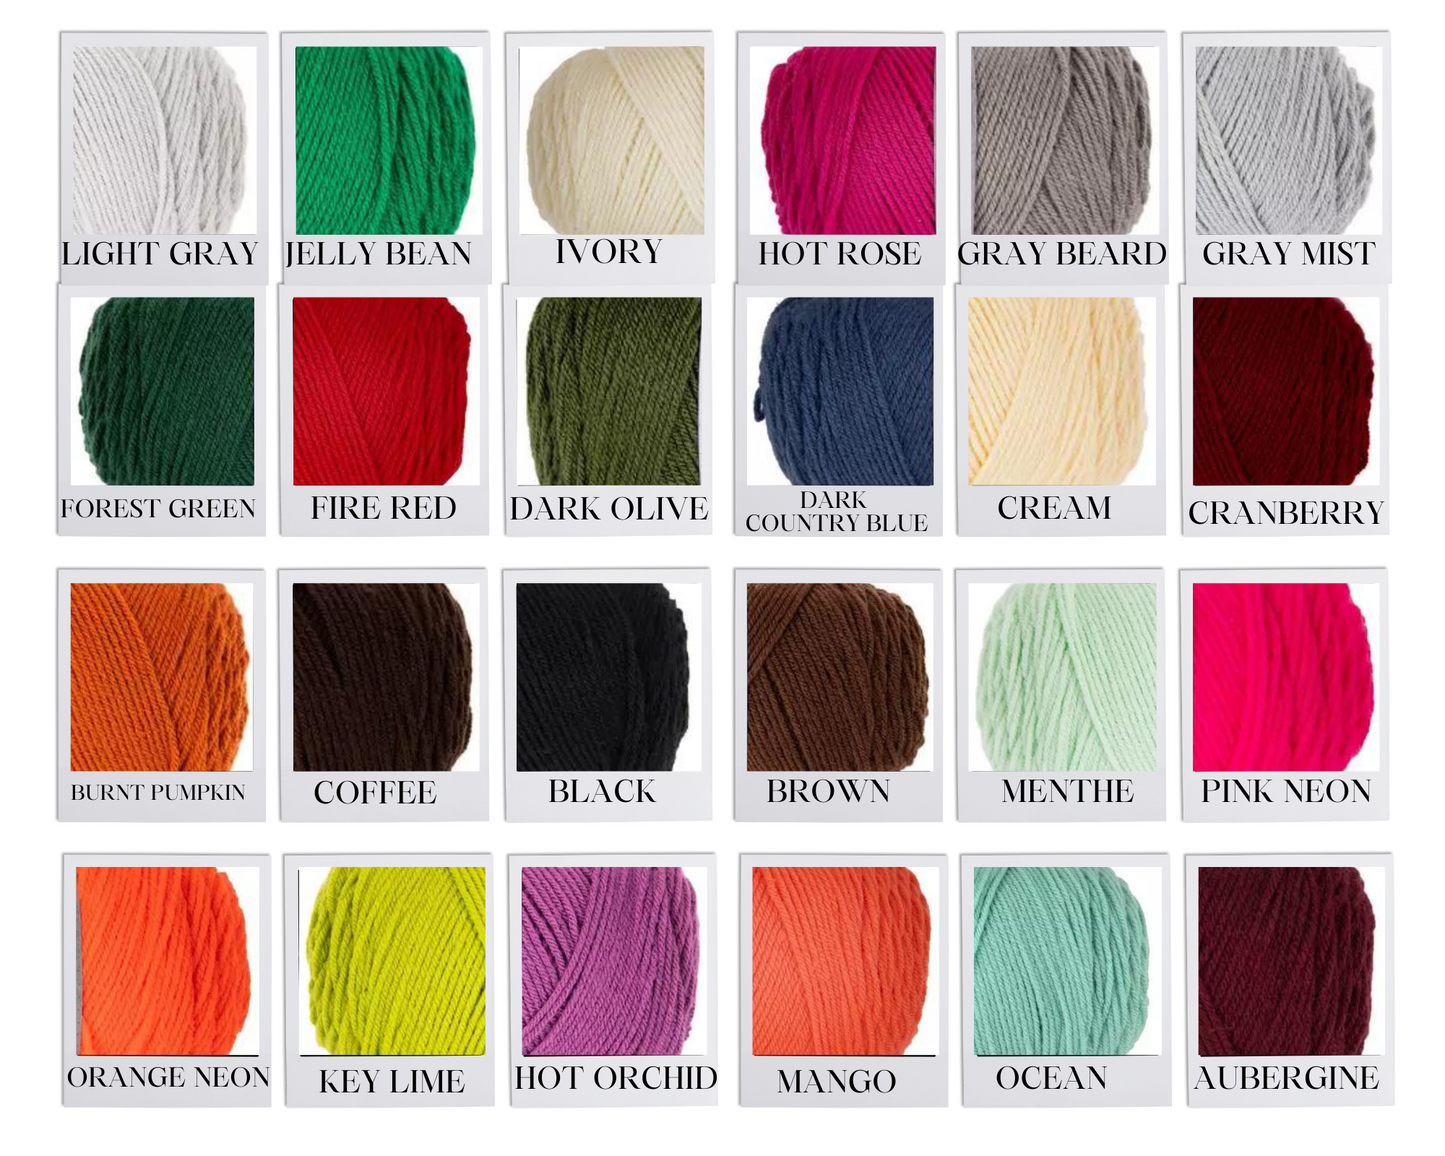 Warm and Cozy Beanie - Single Stripe (multiple colors available)